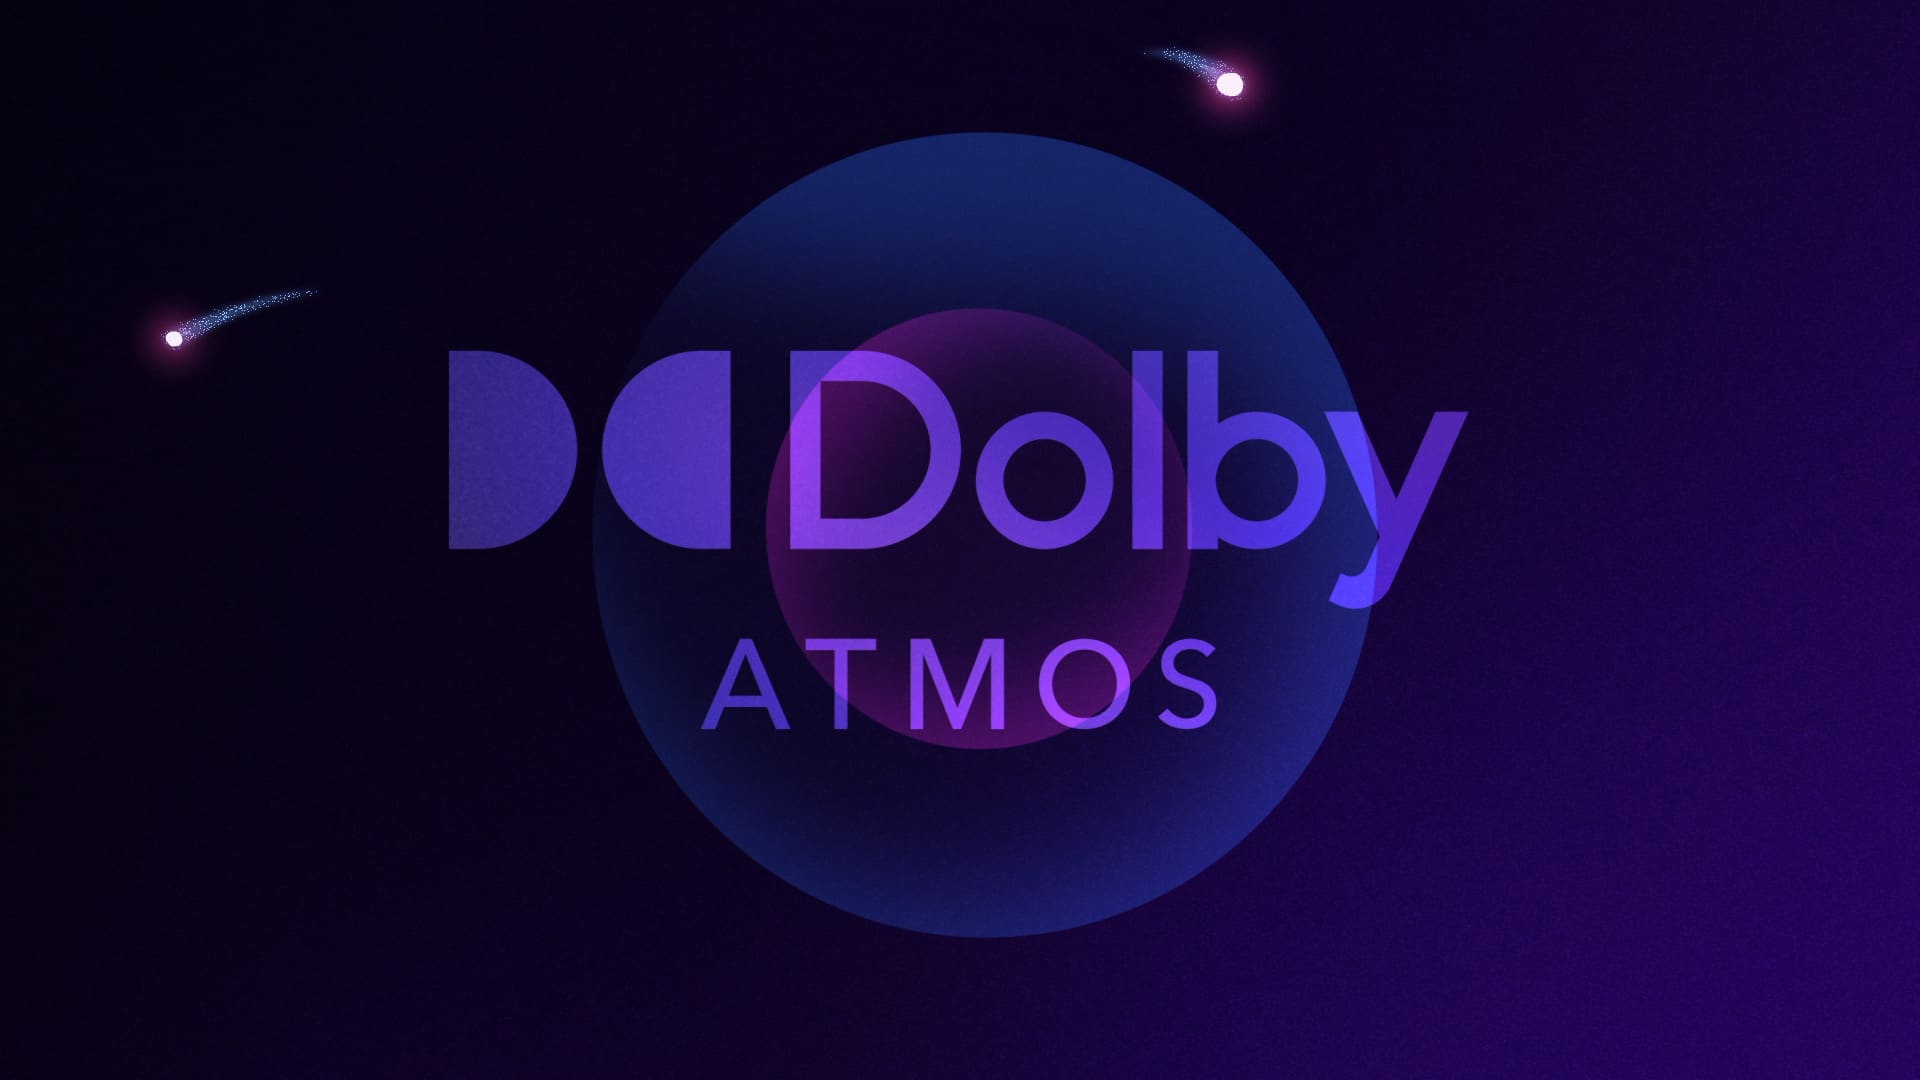 Is Dolby Atmos good for music?